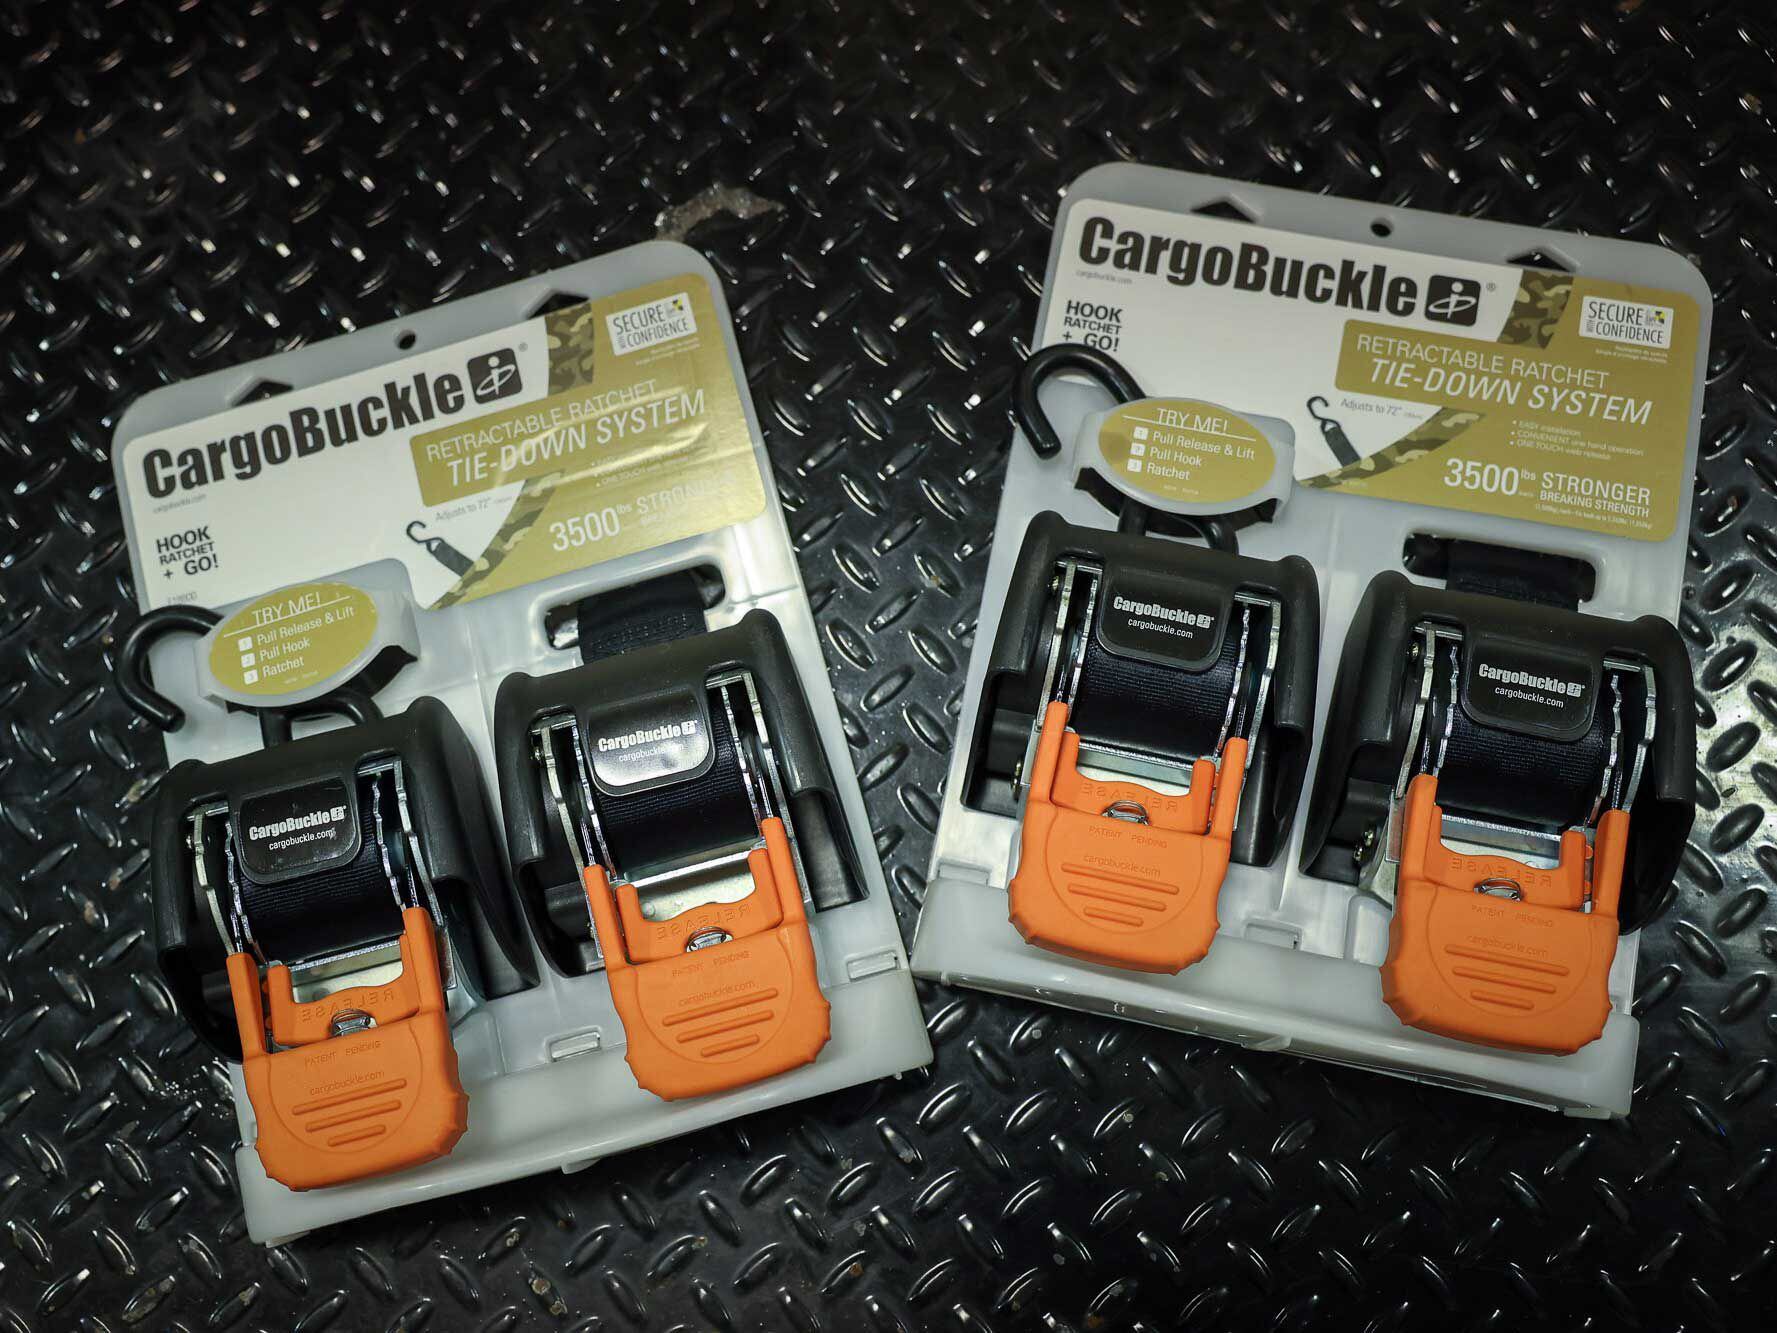 CargoBuckles come in a few different flavors. We opted for the highest-weight-rated version. They all come in sets of two.